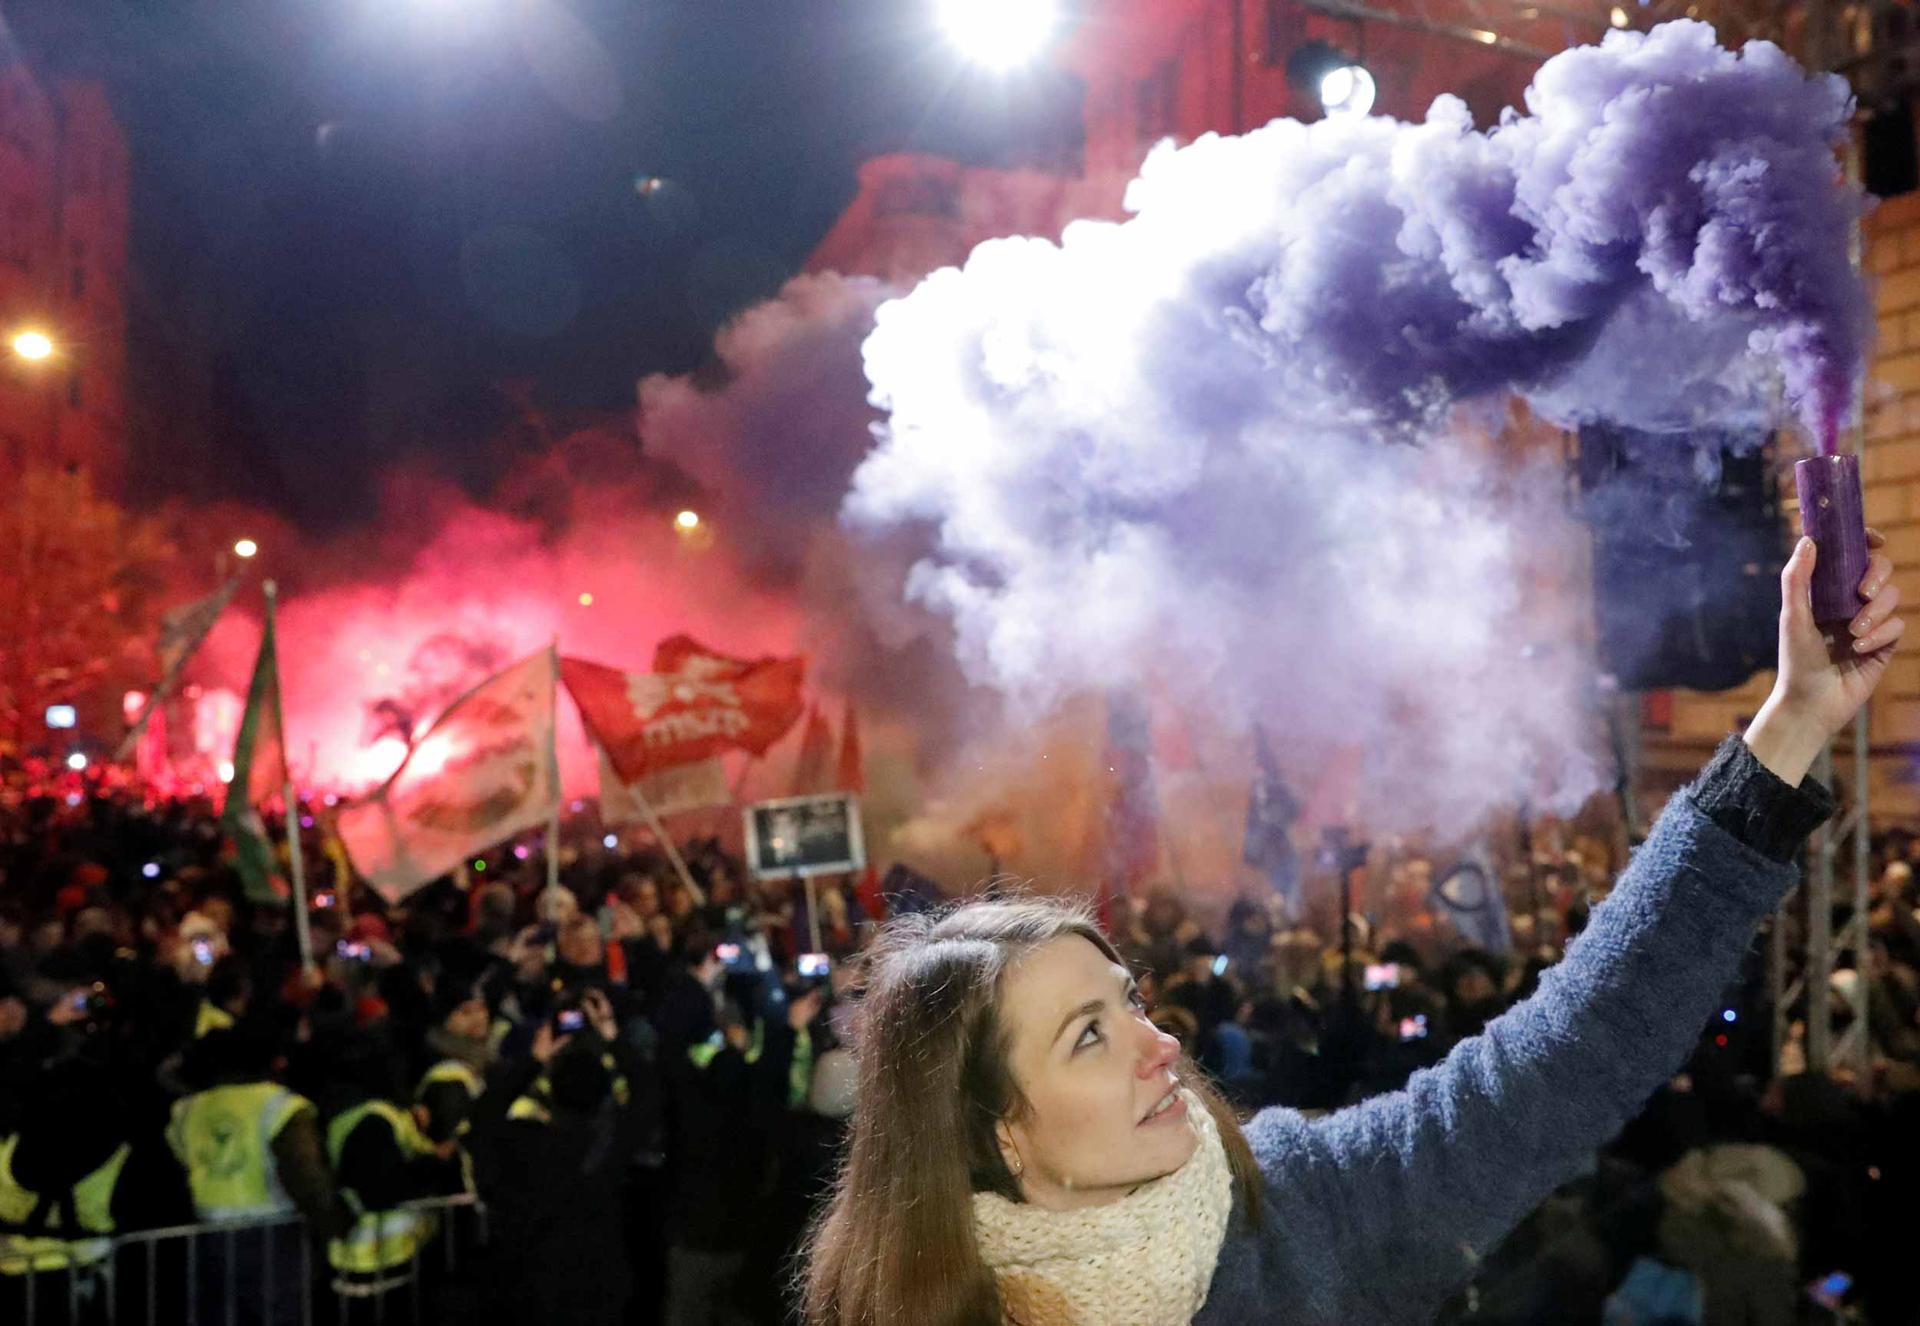 A woman olds a purple flare up the air. Behind her, police clash with protestors in the street.